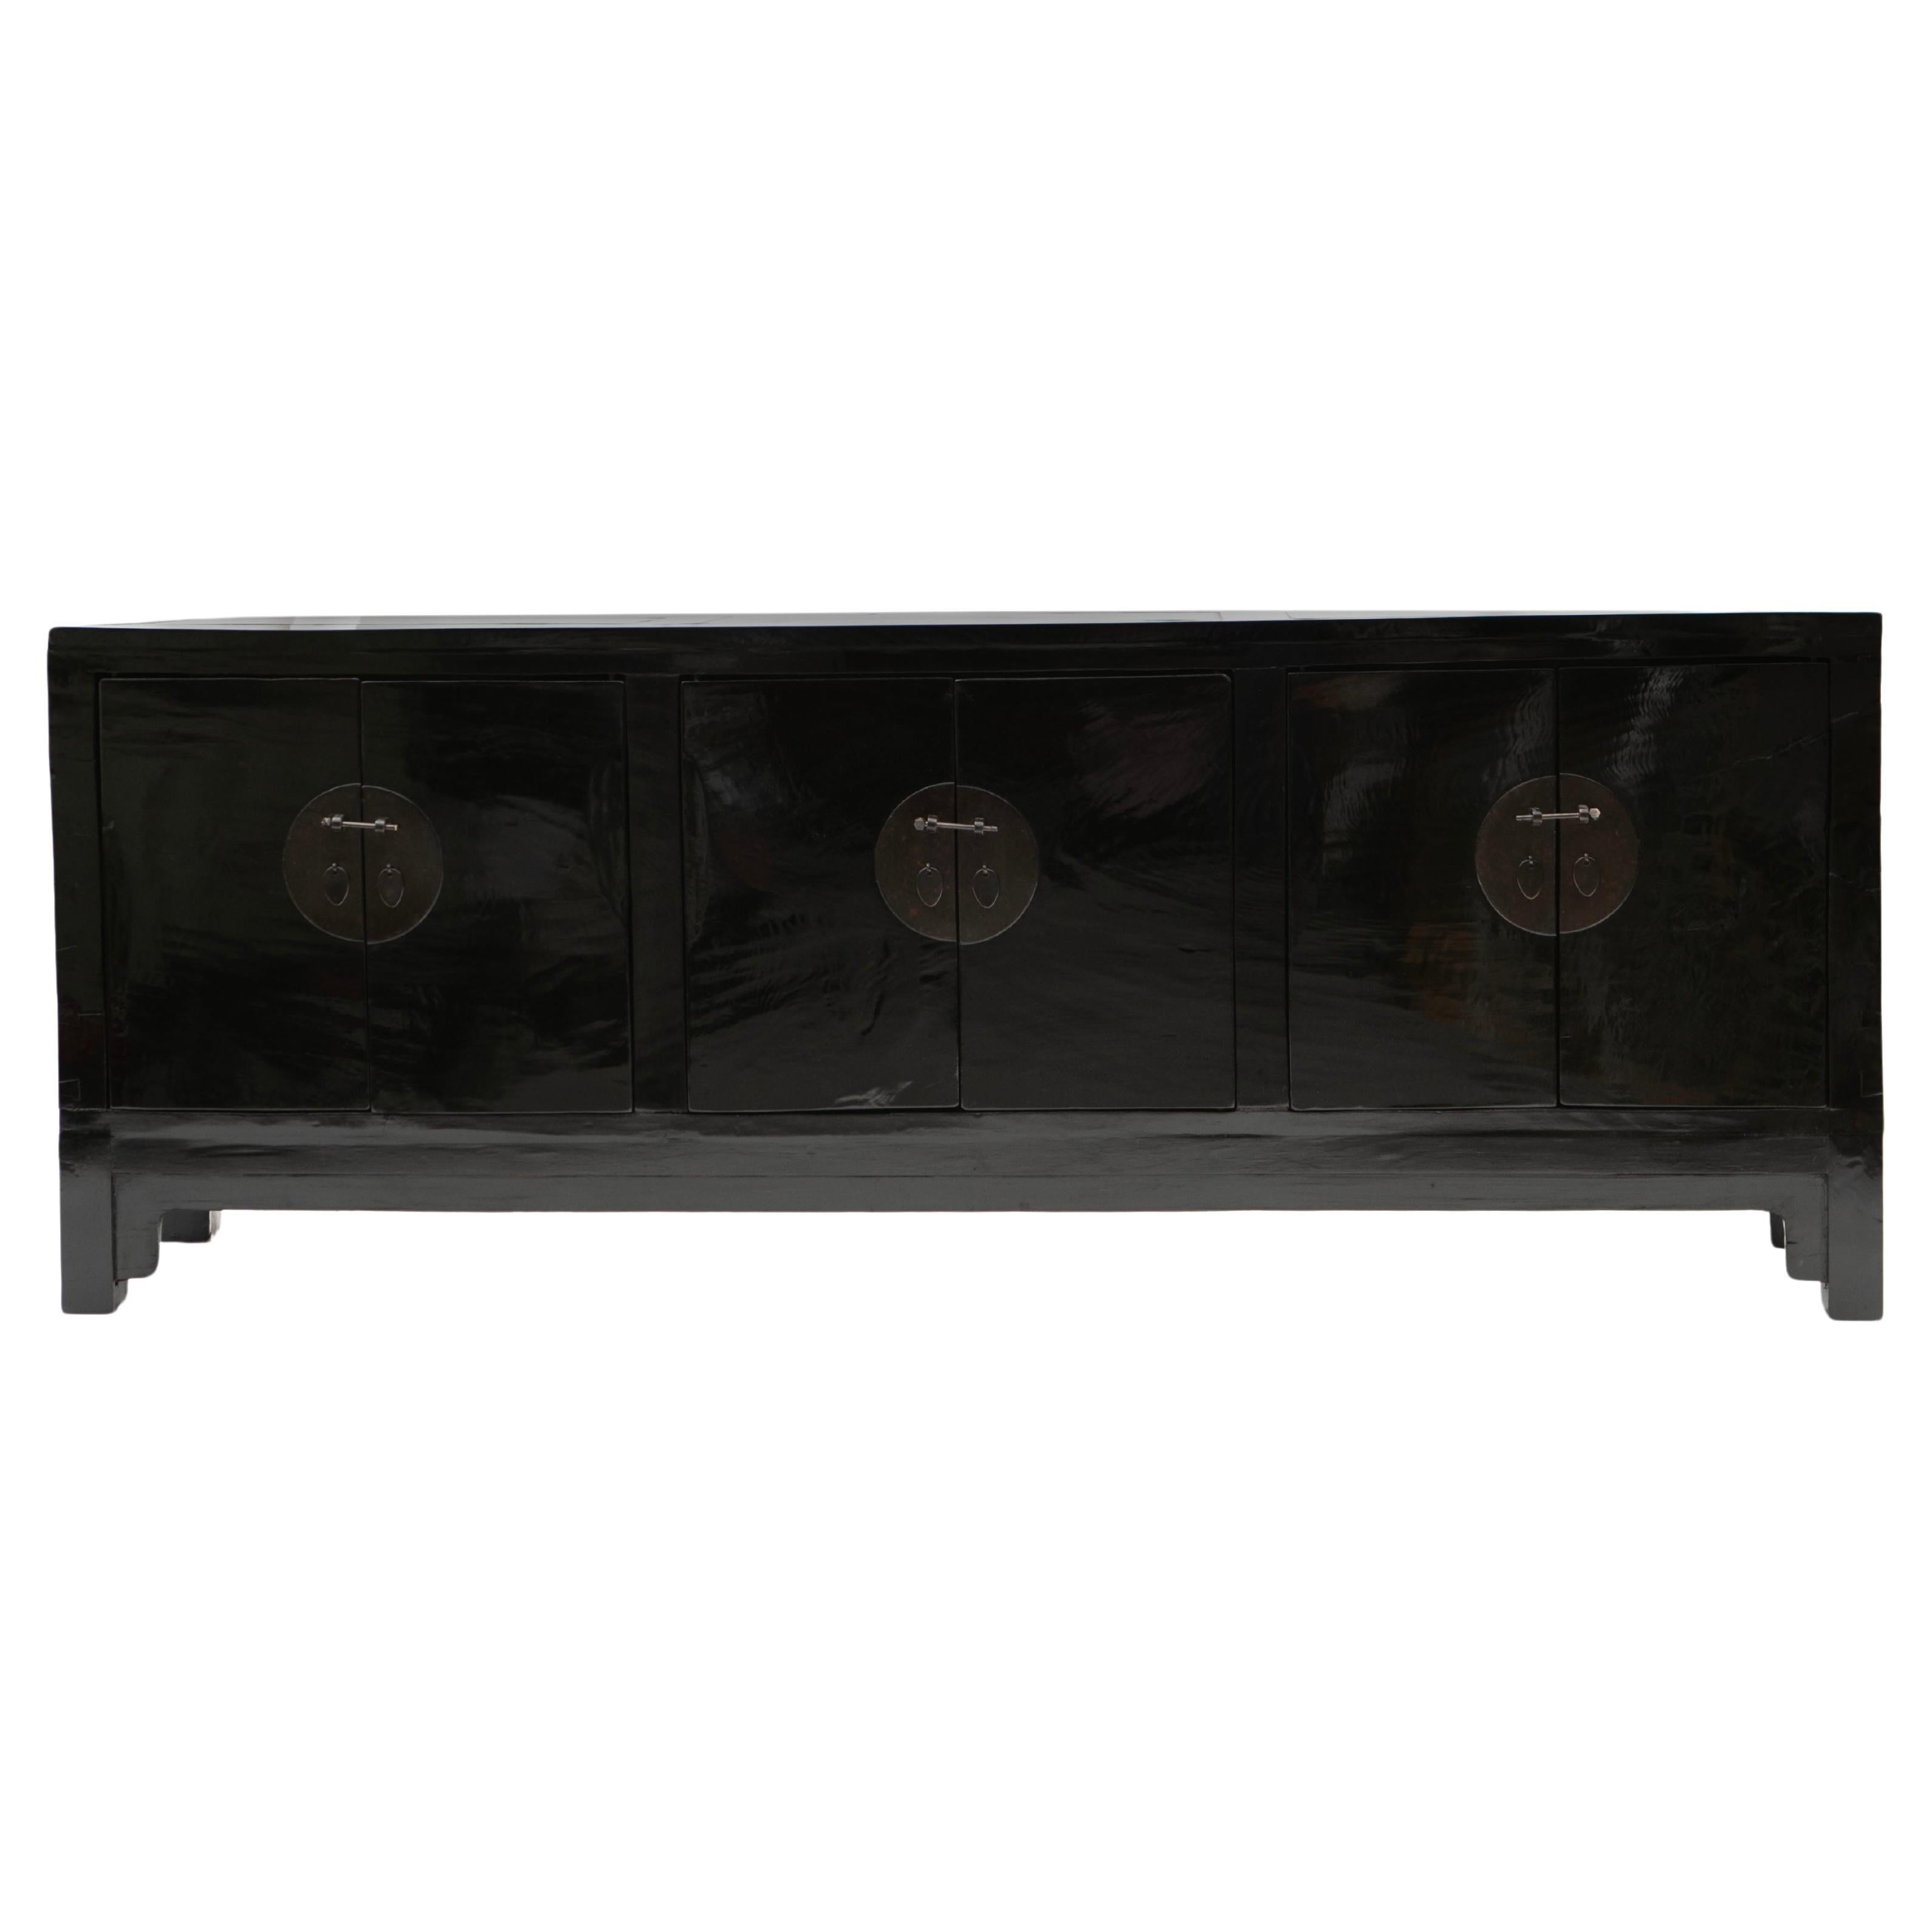 An antique Chinese black lacquer sideboard from the Qing period.

Crafted in black polished walnut and featuring 3 pairs of doors adorned with round metal fittings. The interior offers removable shelves for customizable storage.

Originating from